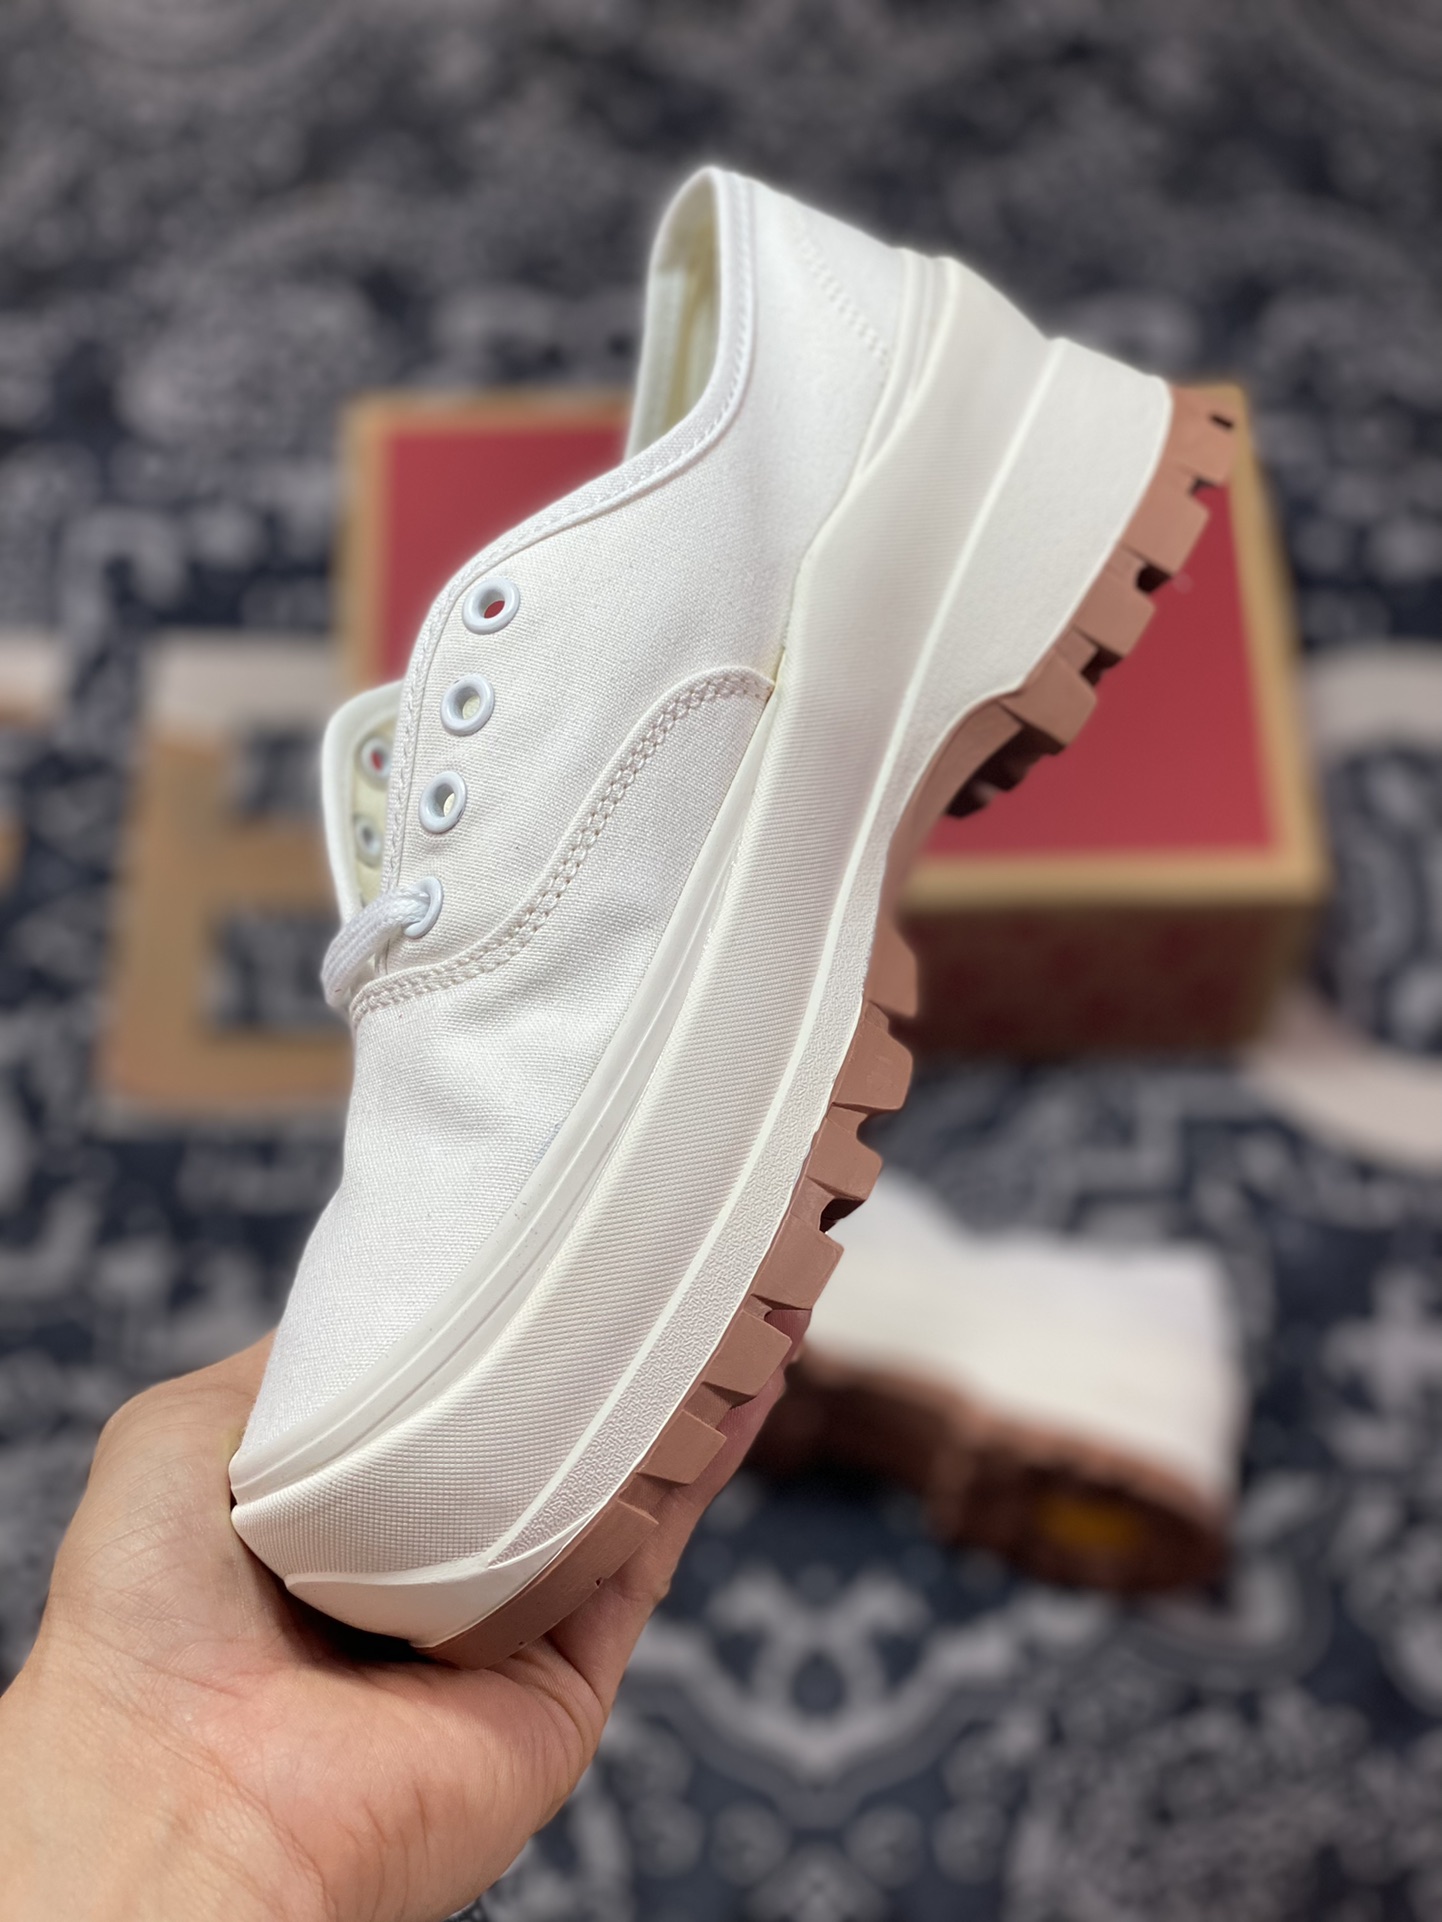 Vans’ instant height-increasing platform shoes are here. Vans Authentic Vibram DX collaboration Anaheim comfortable height-increasing canvas shoes